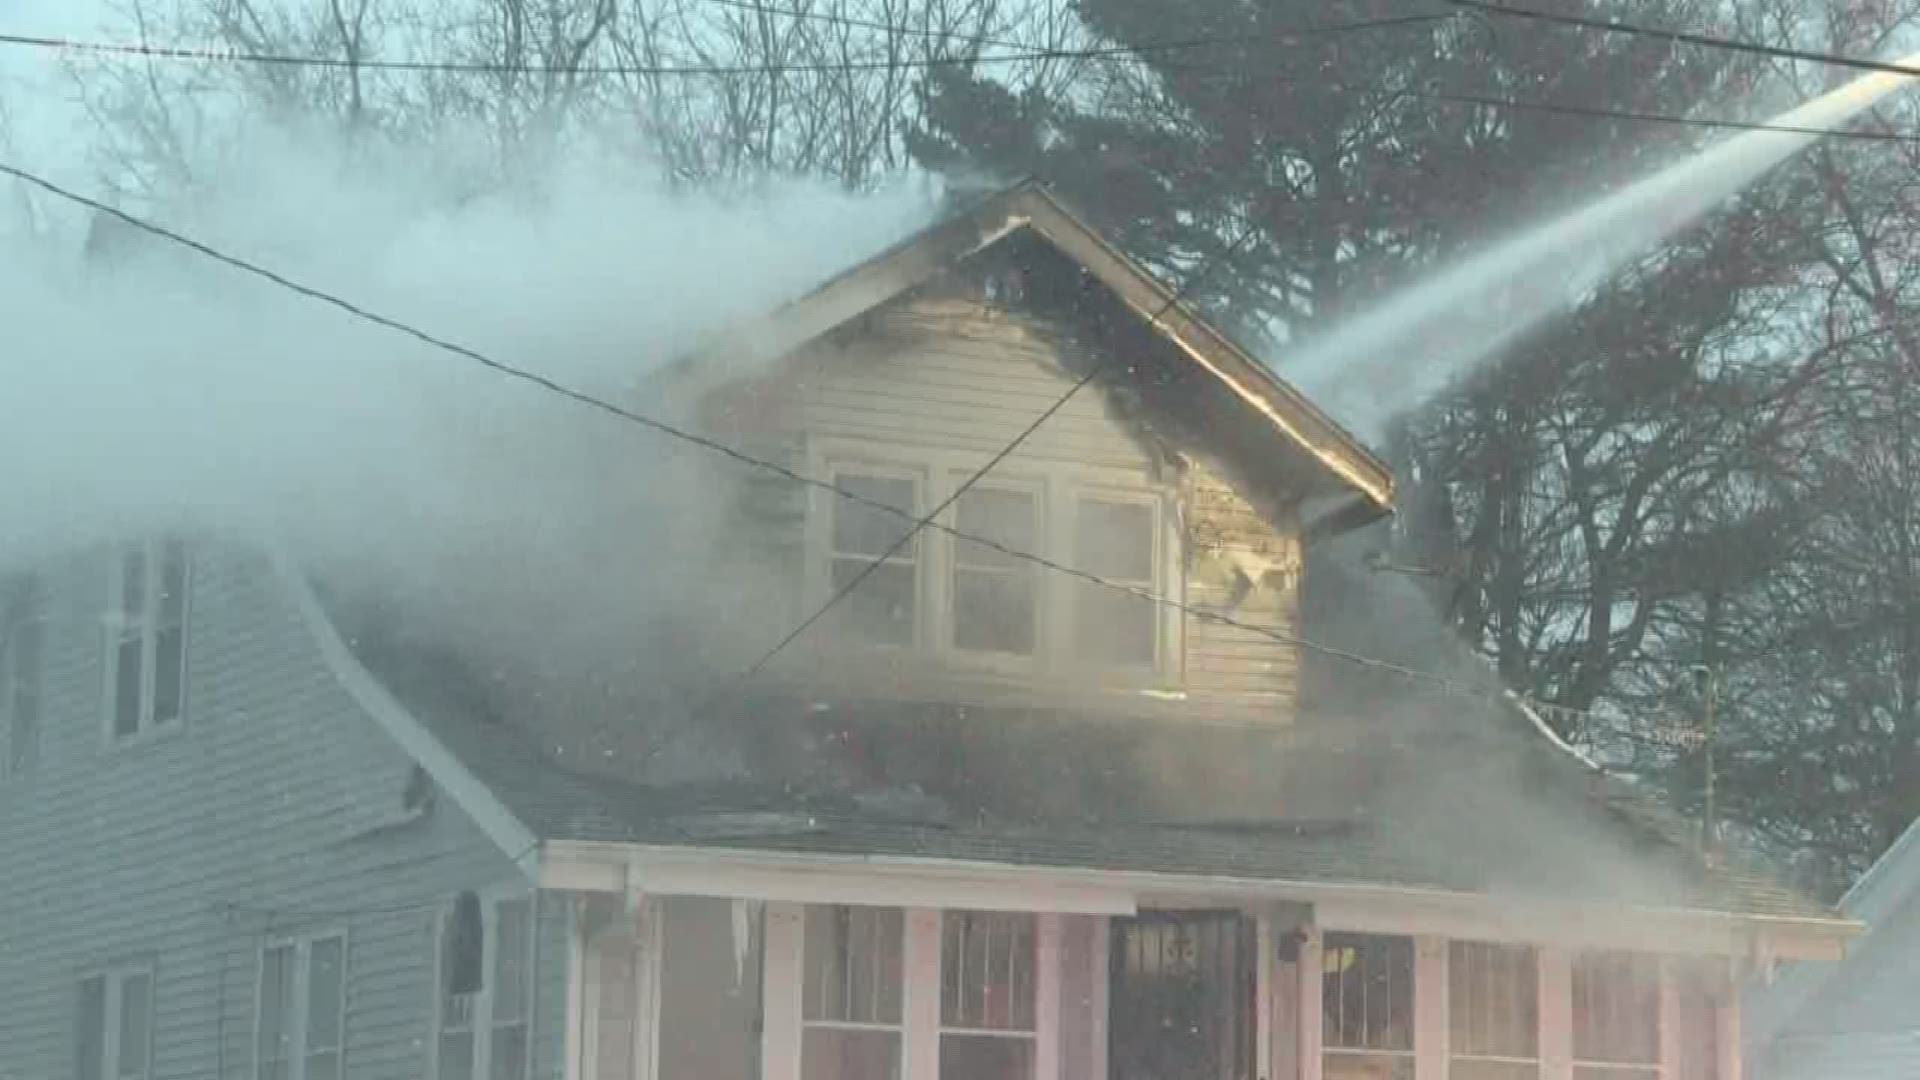 Grand Rapids family escapes house fire